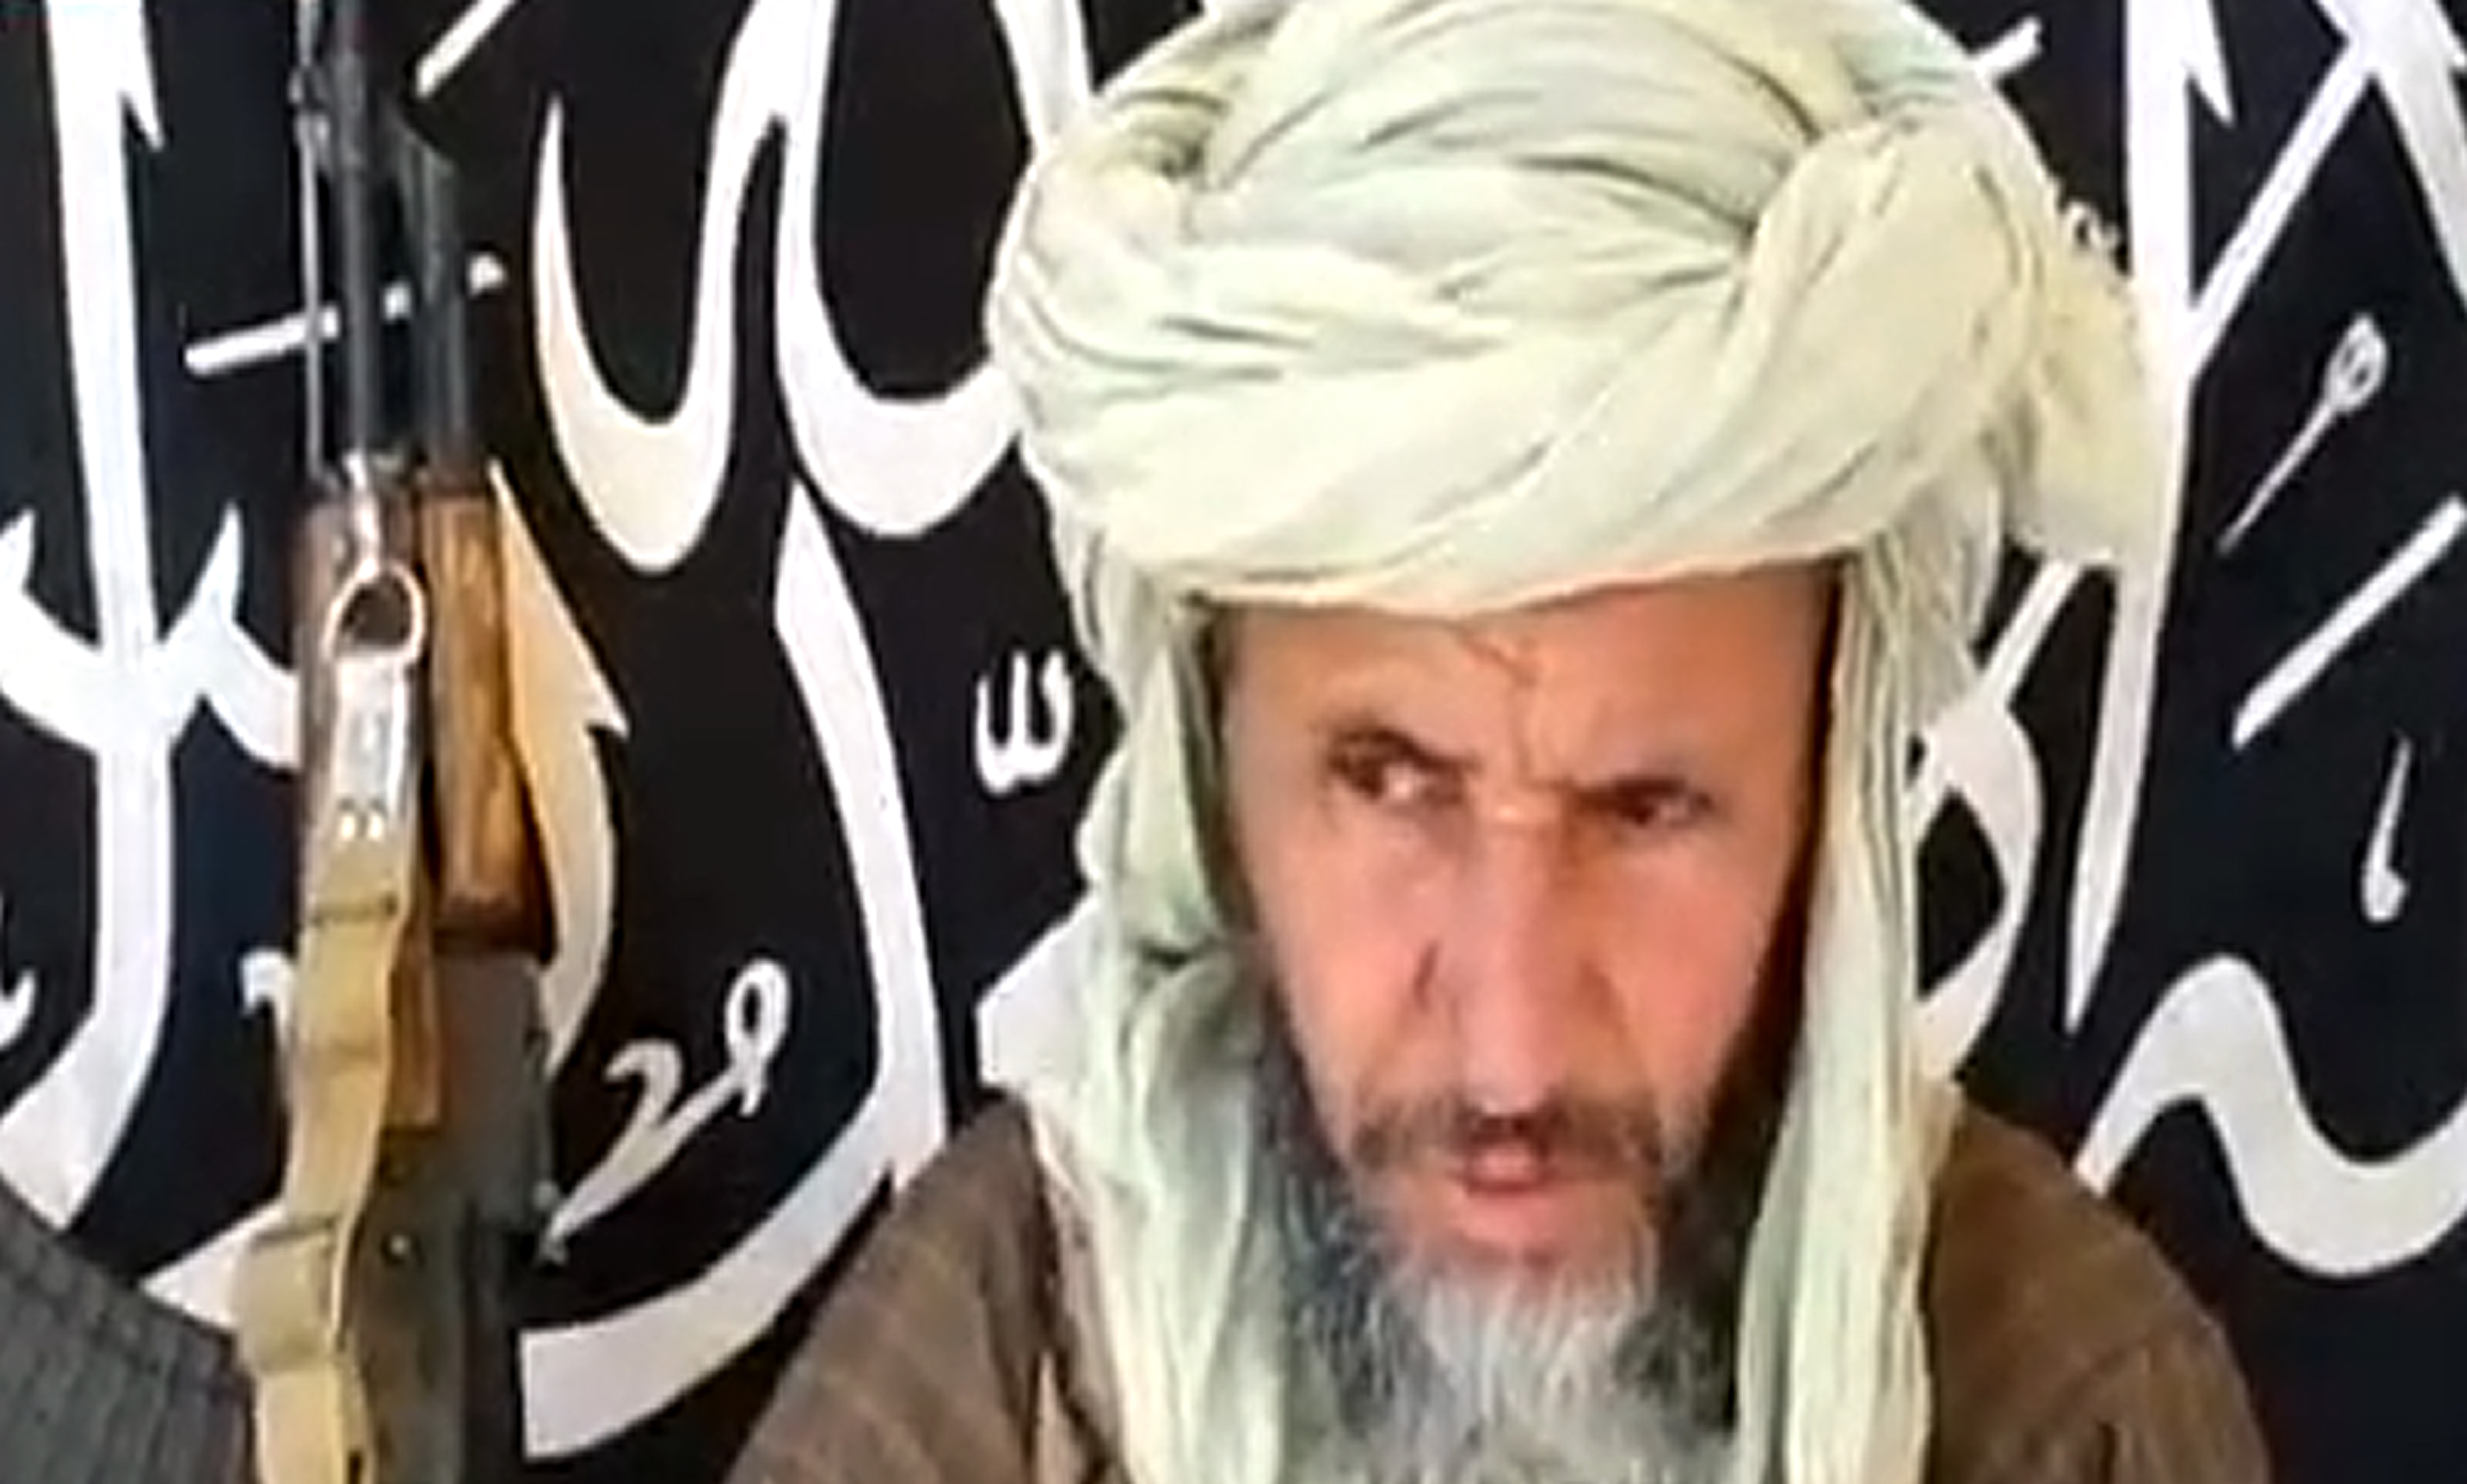 This image released on December 25, 2012 by Sahara Media, shows one of the leaders of Al-Qaeda in the Islamic Maghreb (AQIM), Abdelhamid Abu Zeid in an undisclosed place. Al-Qaeda's branch in northern Africa on March 4, 2013 confirmed that one of its senior leaders, Abdelhamid Abu Zeid, had been killed in northern Mali, a report said. Zeid was killed as a result of a French bombing raid in the Ifoghas mountains, a member of Al-Qaeda in the Islamic Maghreb (AQMI) who normally writes for jihadist websites told the private Mauritanian news agency Sahara Medias. === RESTRICTED TO EDITORIAL USE - MANDATORY CREDIT "AFP PHOTO / SAHARA MEDIA " - NO MARKETING NO ADVERTISING CAMPAIGNS - DISTRIBUTED AS A SERVICE TO CLIENTS - NO ARCHIVES ===